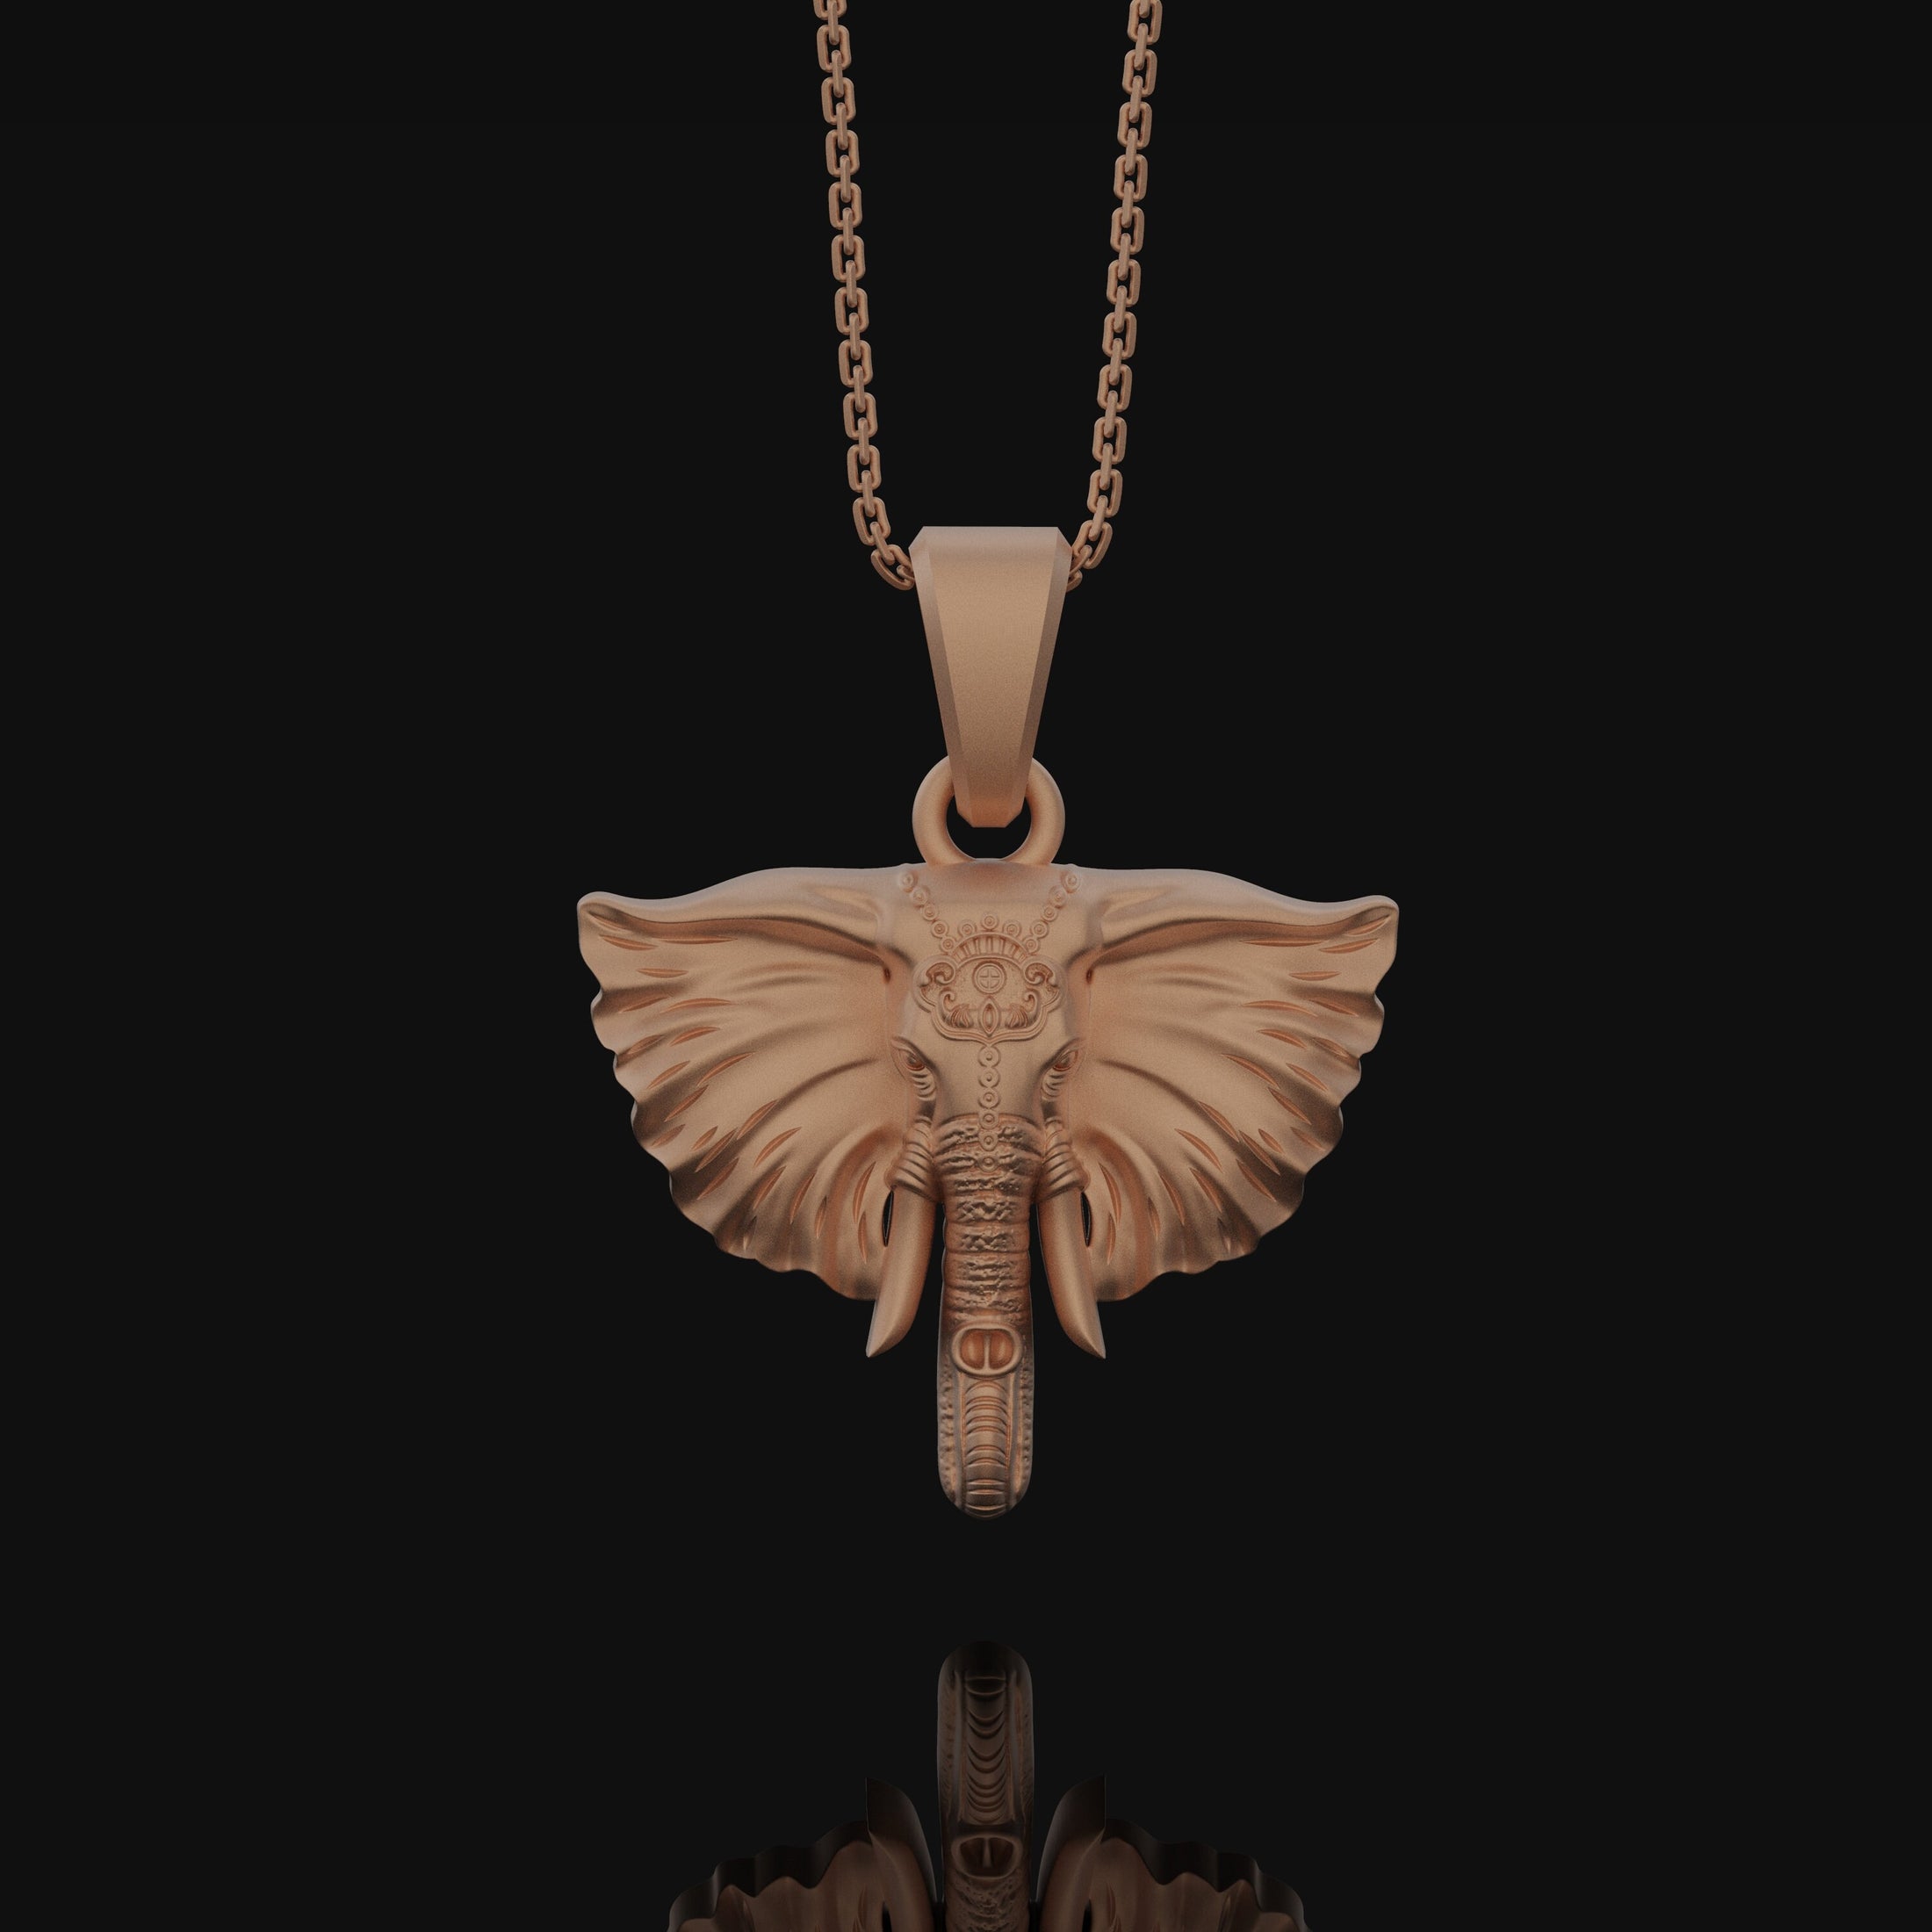 Traditional Elephant Charm Ivory Necklace Hindu Ornament, Majestic Animal, Cultural Pendant, Spiritual Jewelry, Regal Accessory Rose Gold Matte